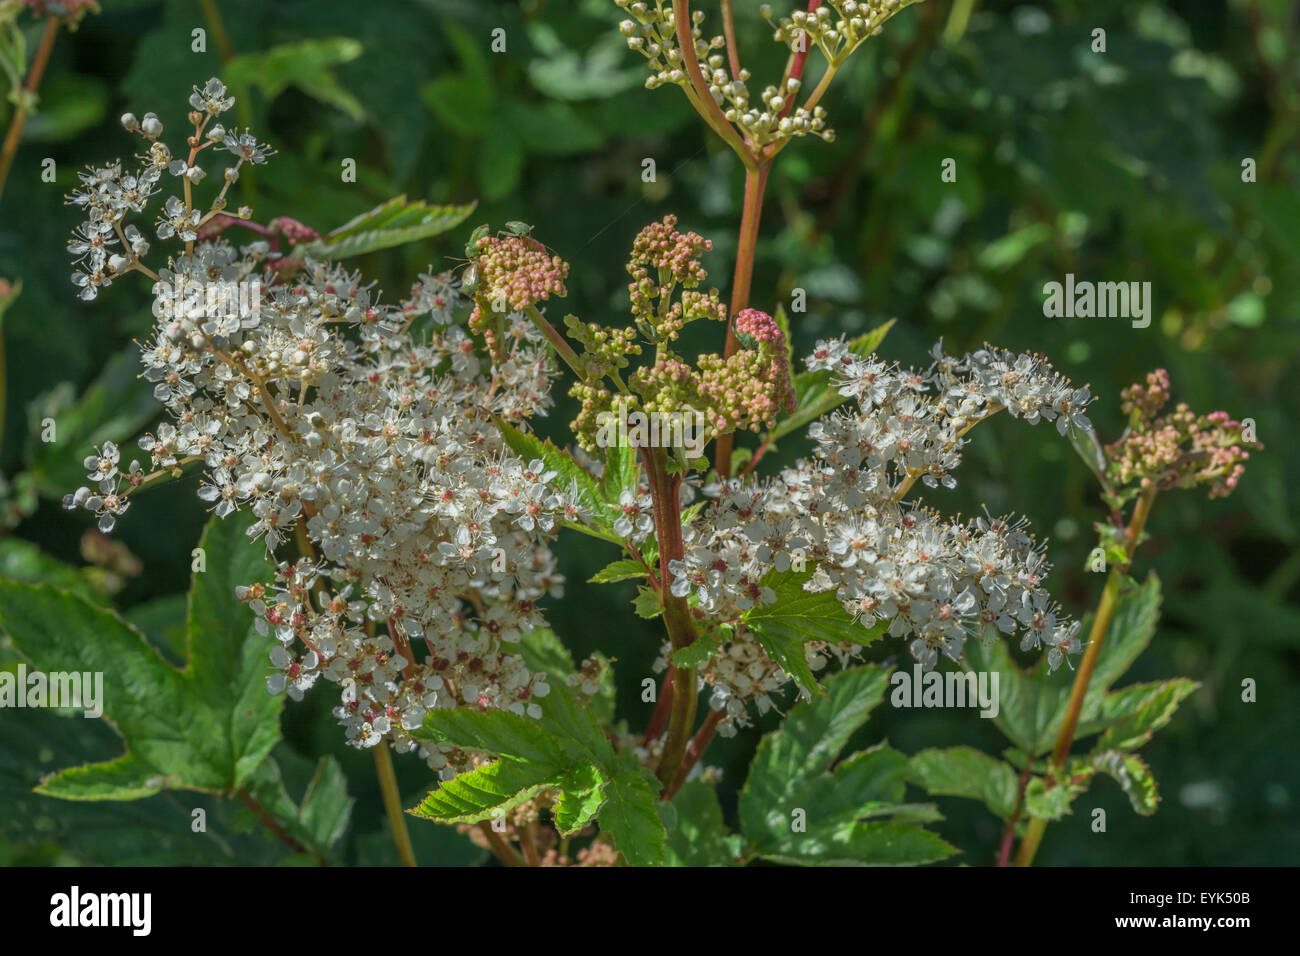 Blossom and flower buds of Meadowsweet [Filipendula ulmaria]. A water-loving foraged plant - flowers for syrup, leaves for their analgesic properties. Stock Photo